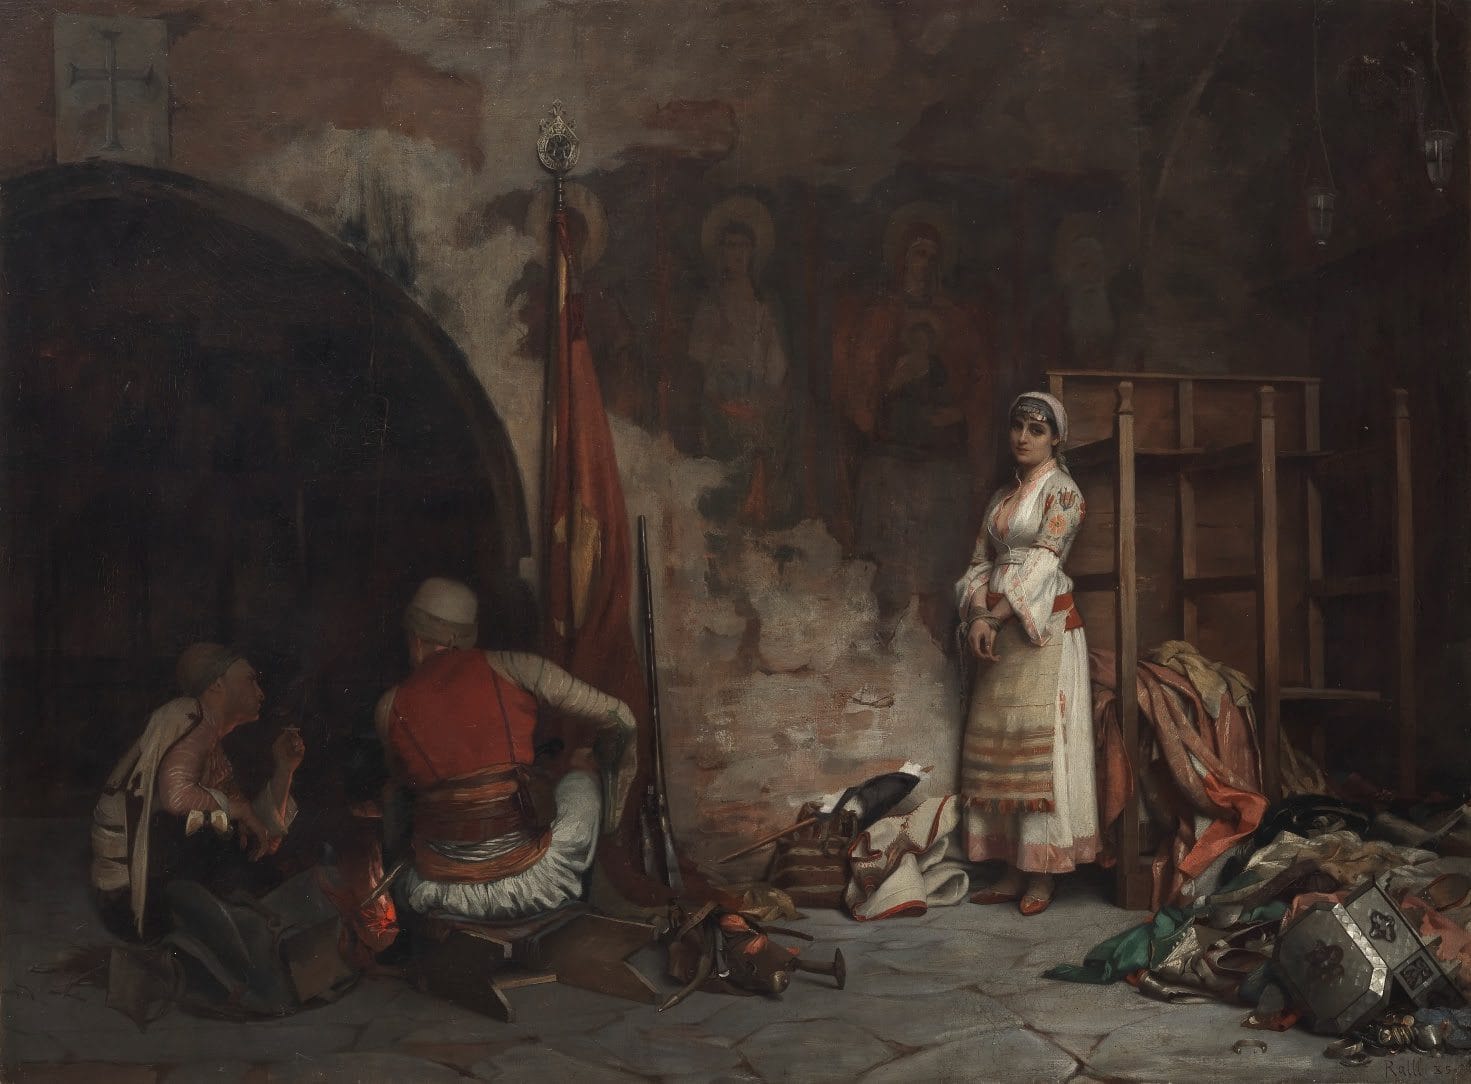 La Captive by Théodore Ralli. Sold for €375,313.